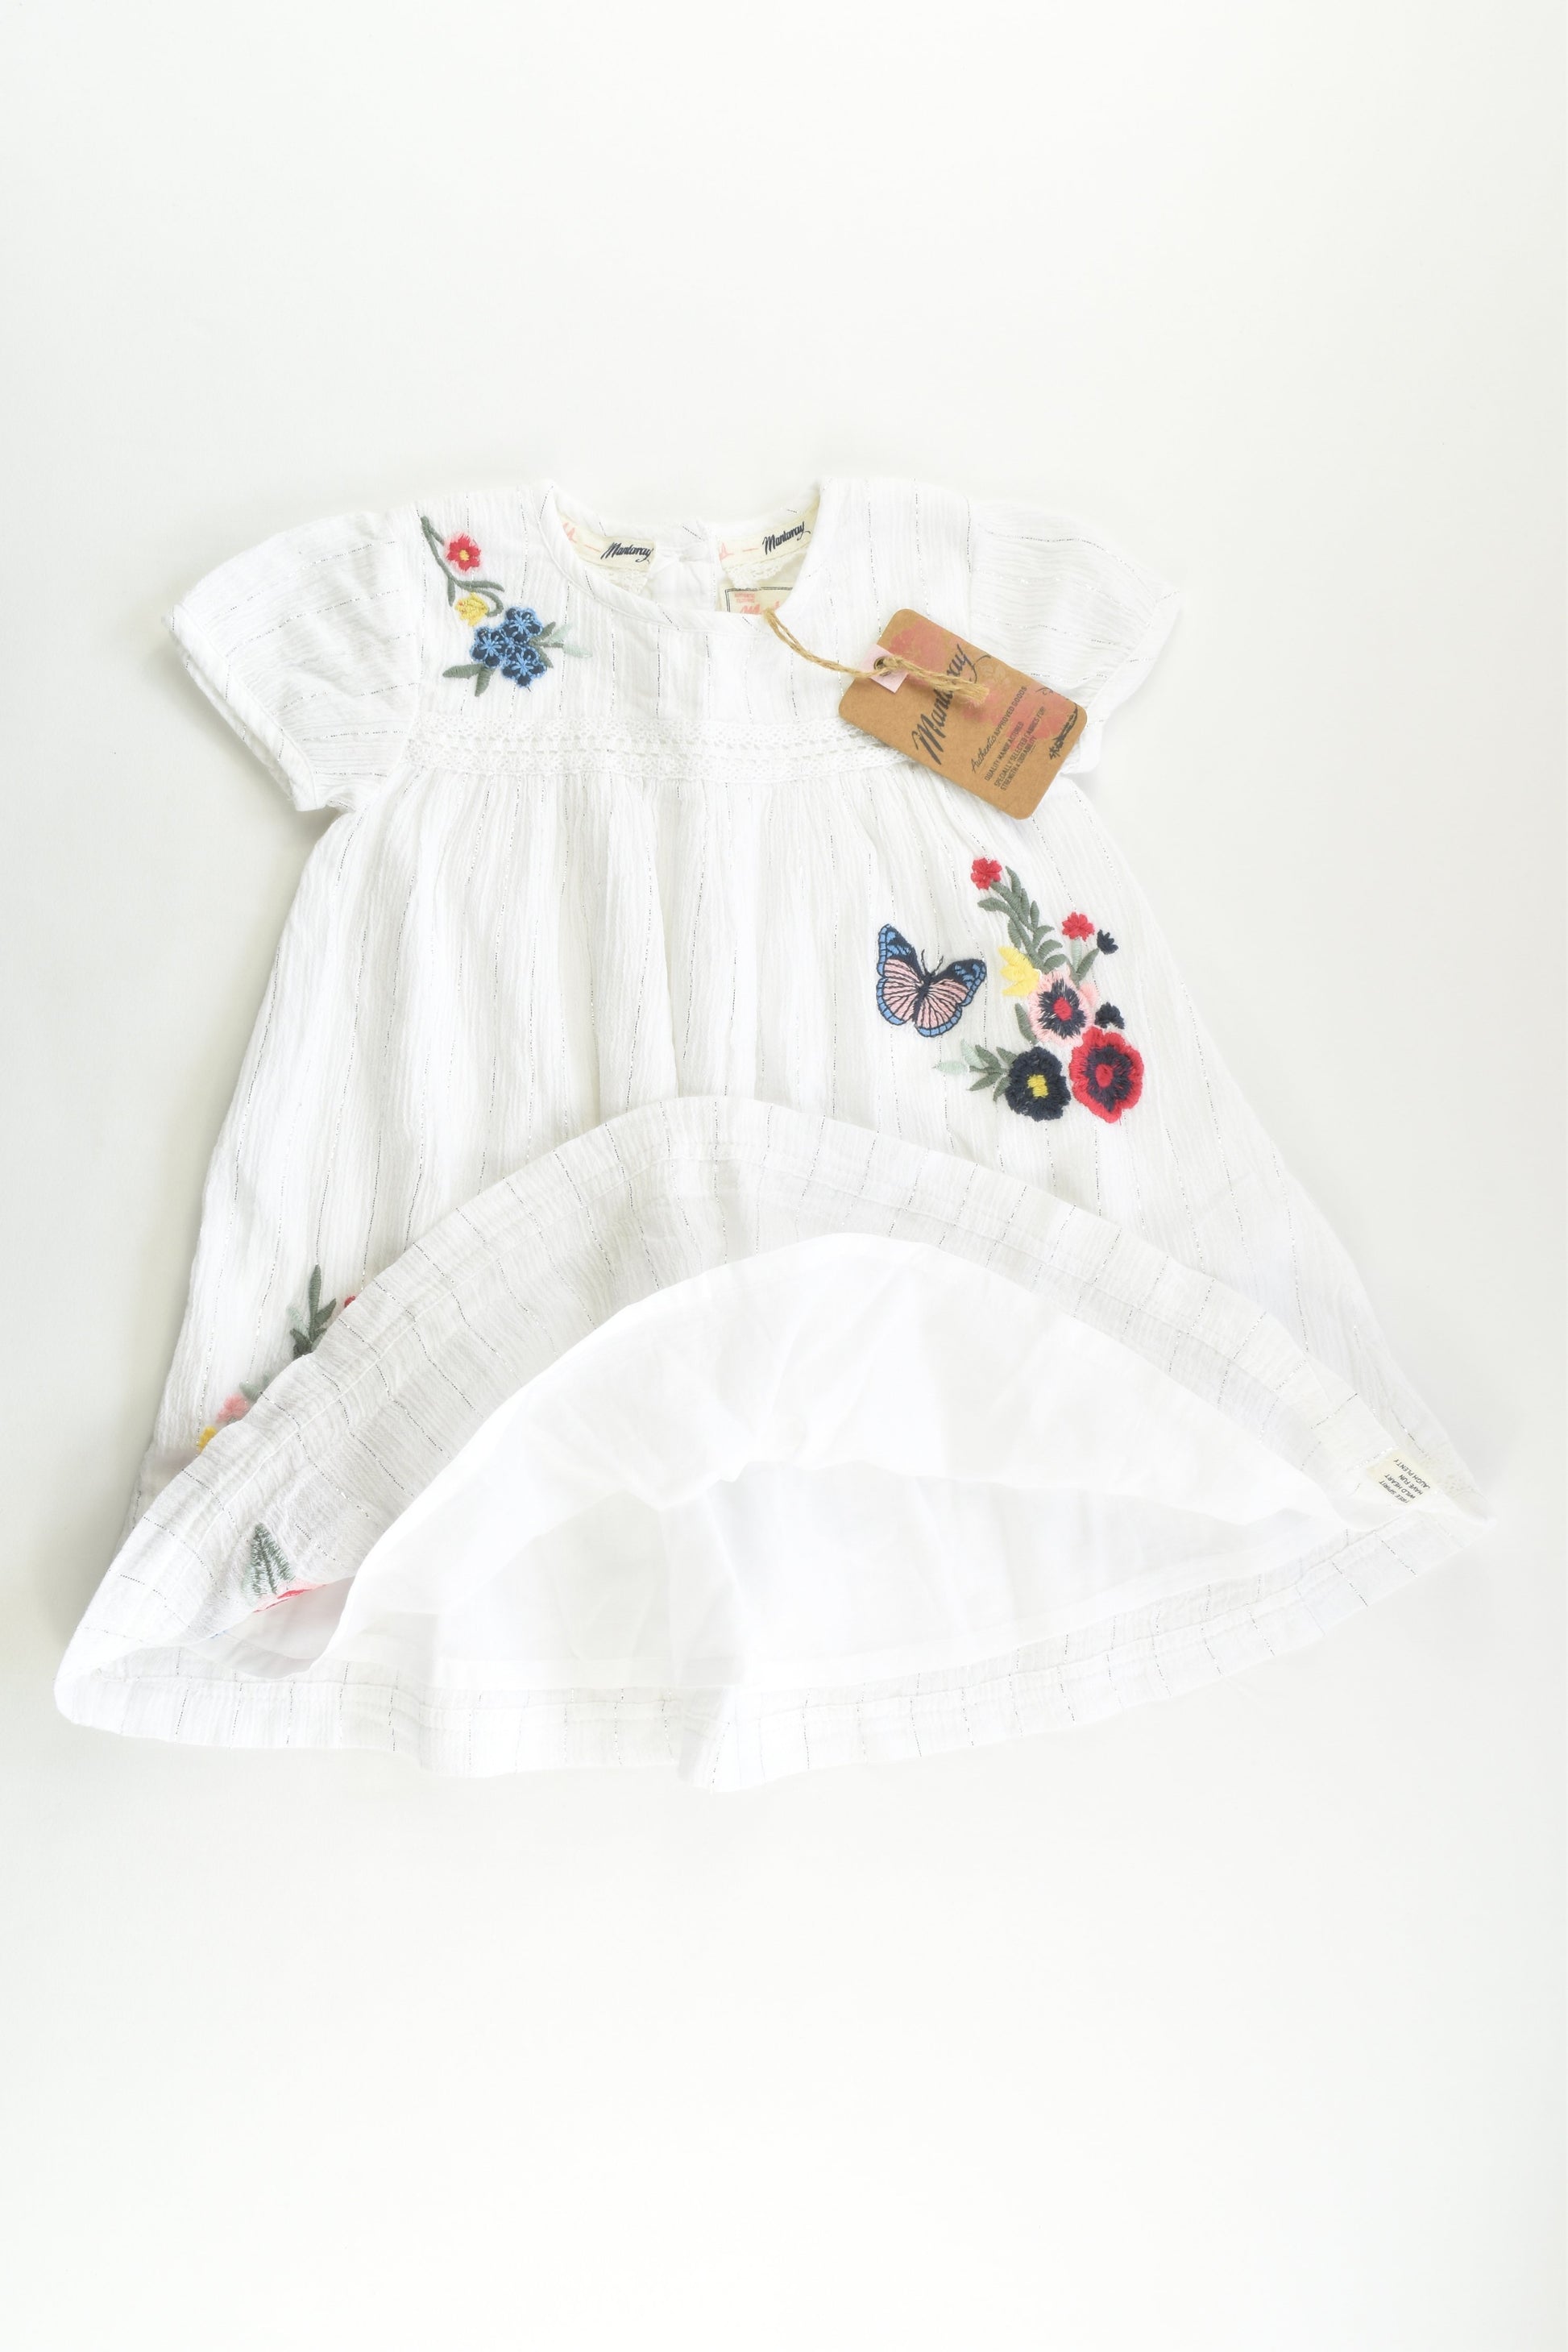 NEW Mantaray (Debenhams) Size 1 (12-18 months) Lined Floral Embroidery Dress